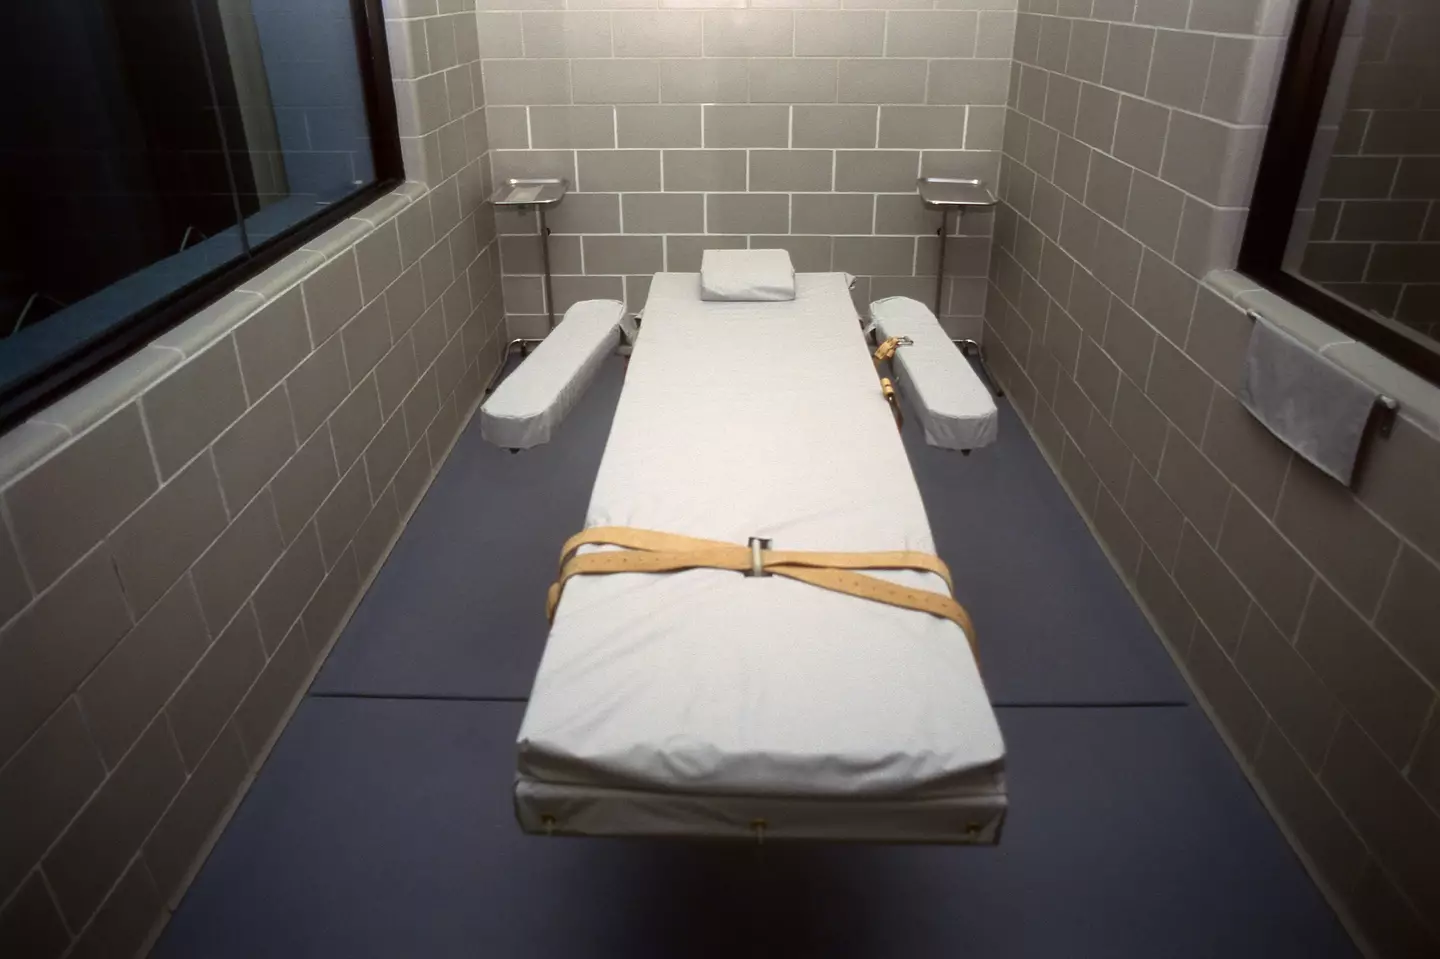 Inmates on death row in Texas are not given a lavish last meal.